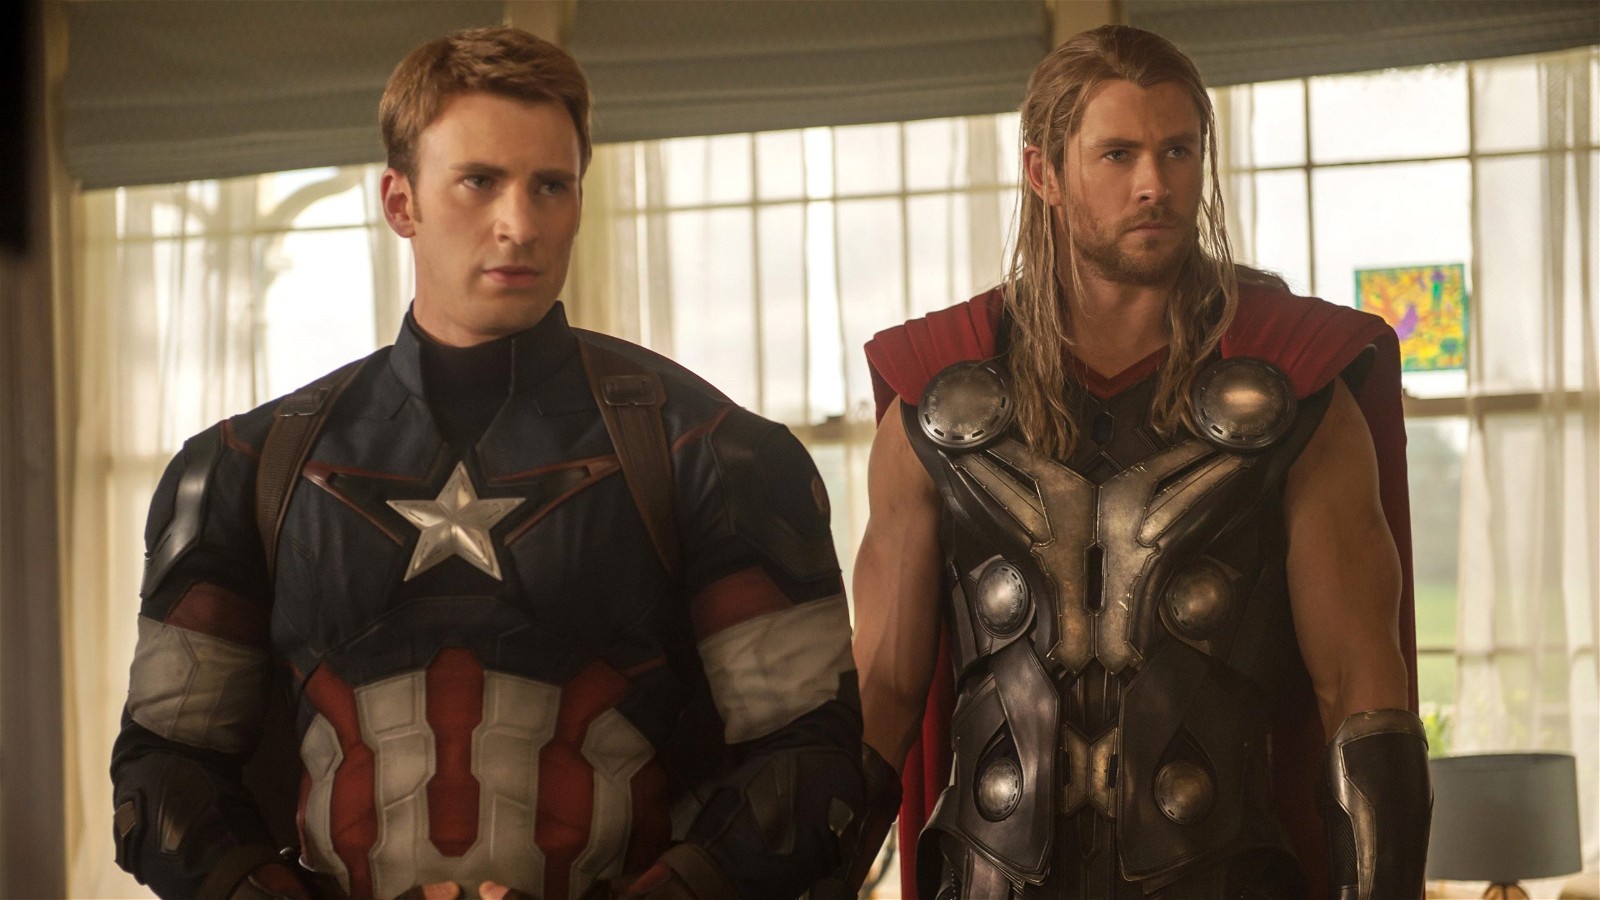 Avengers: Age of Ultron got a lot of love in a recent Marvel poll